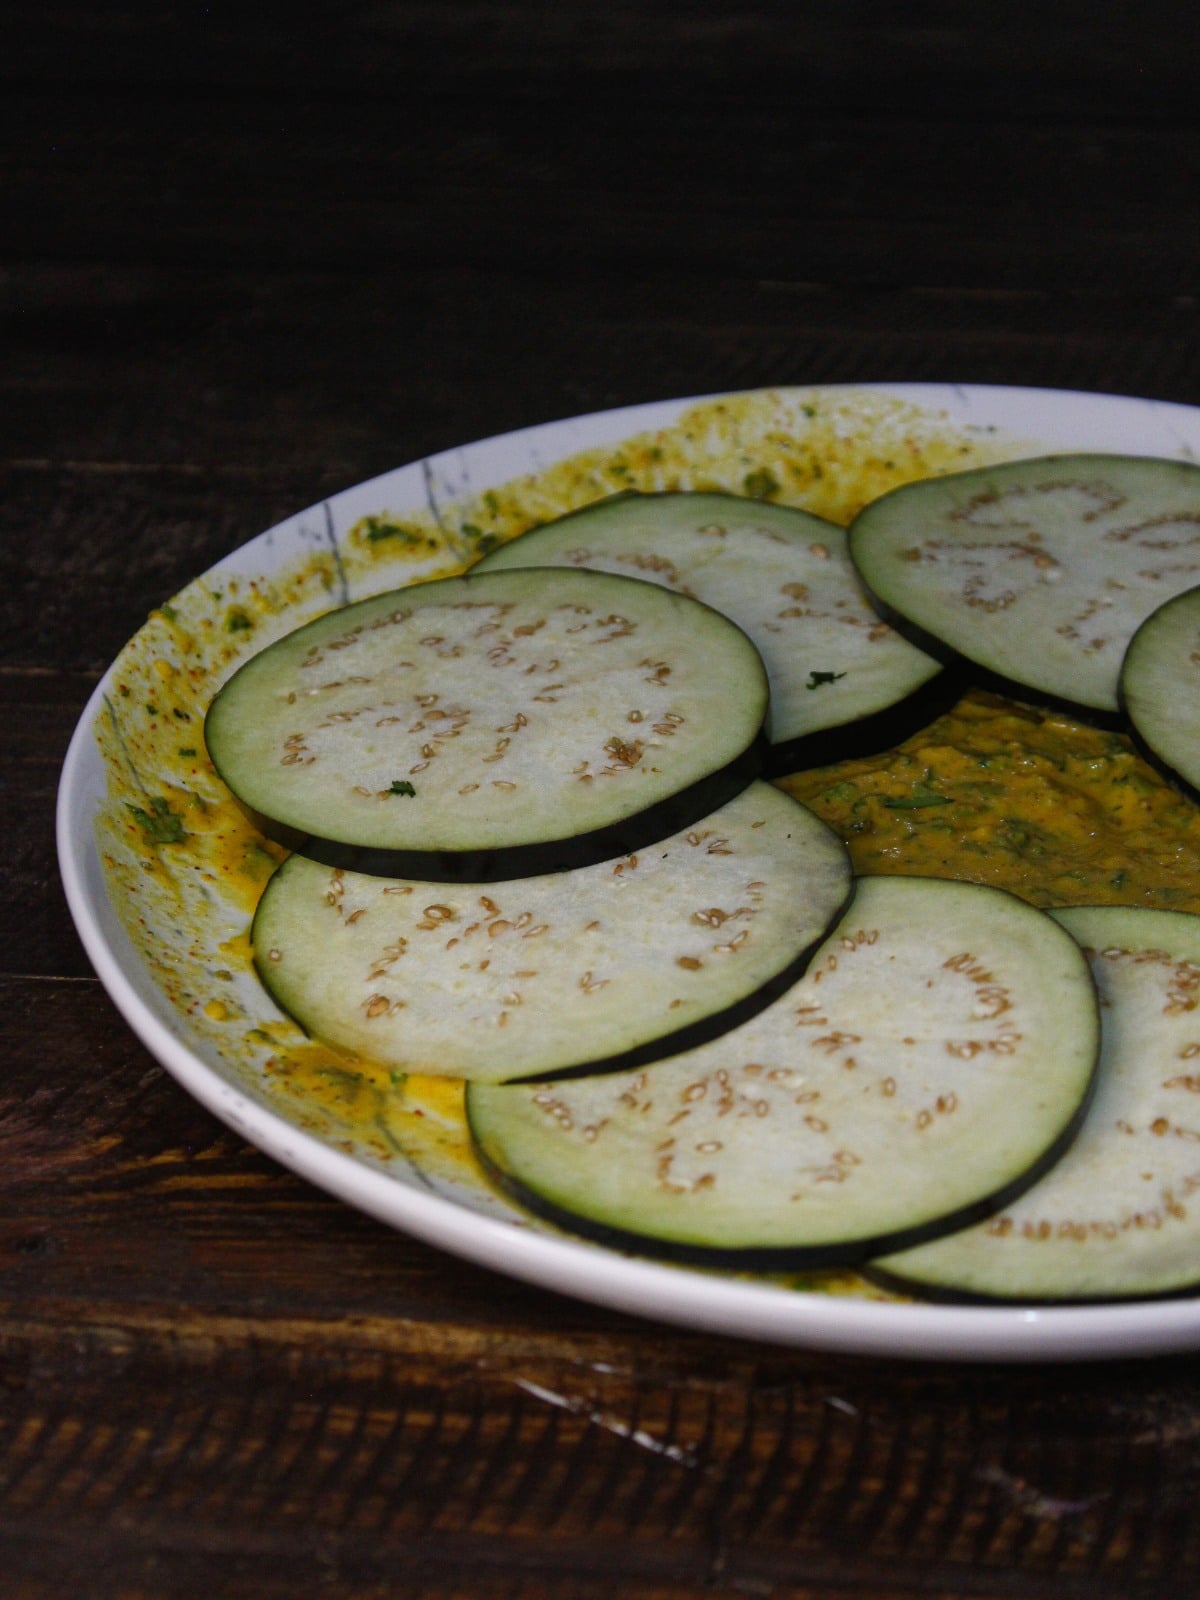 Cut eggplants into the slices